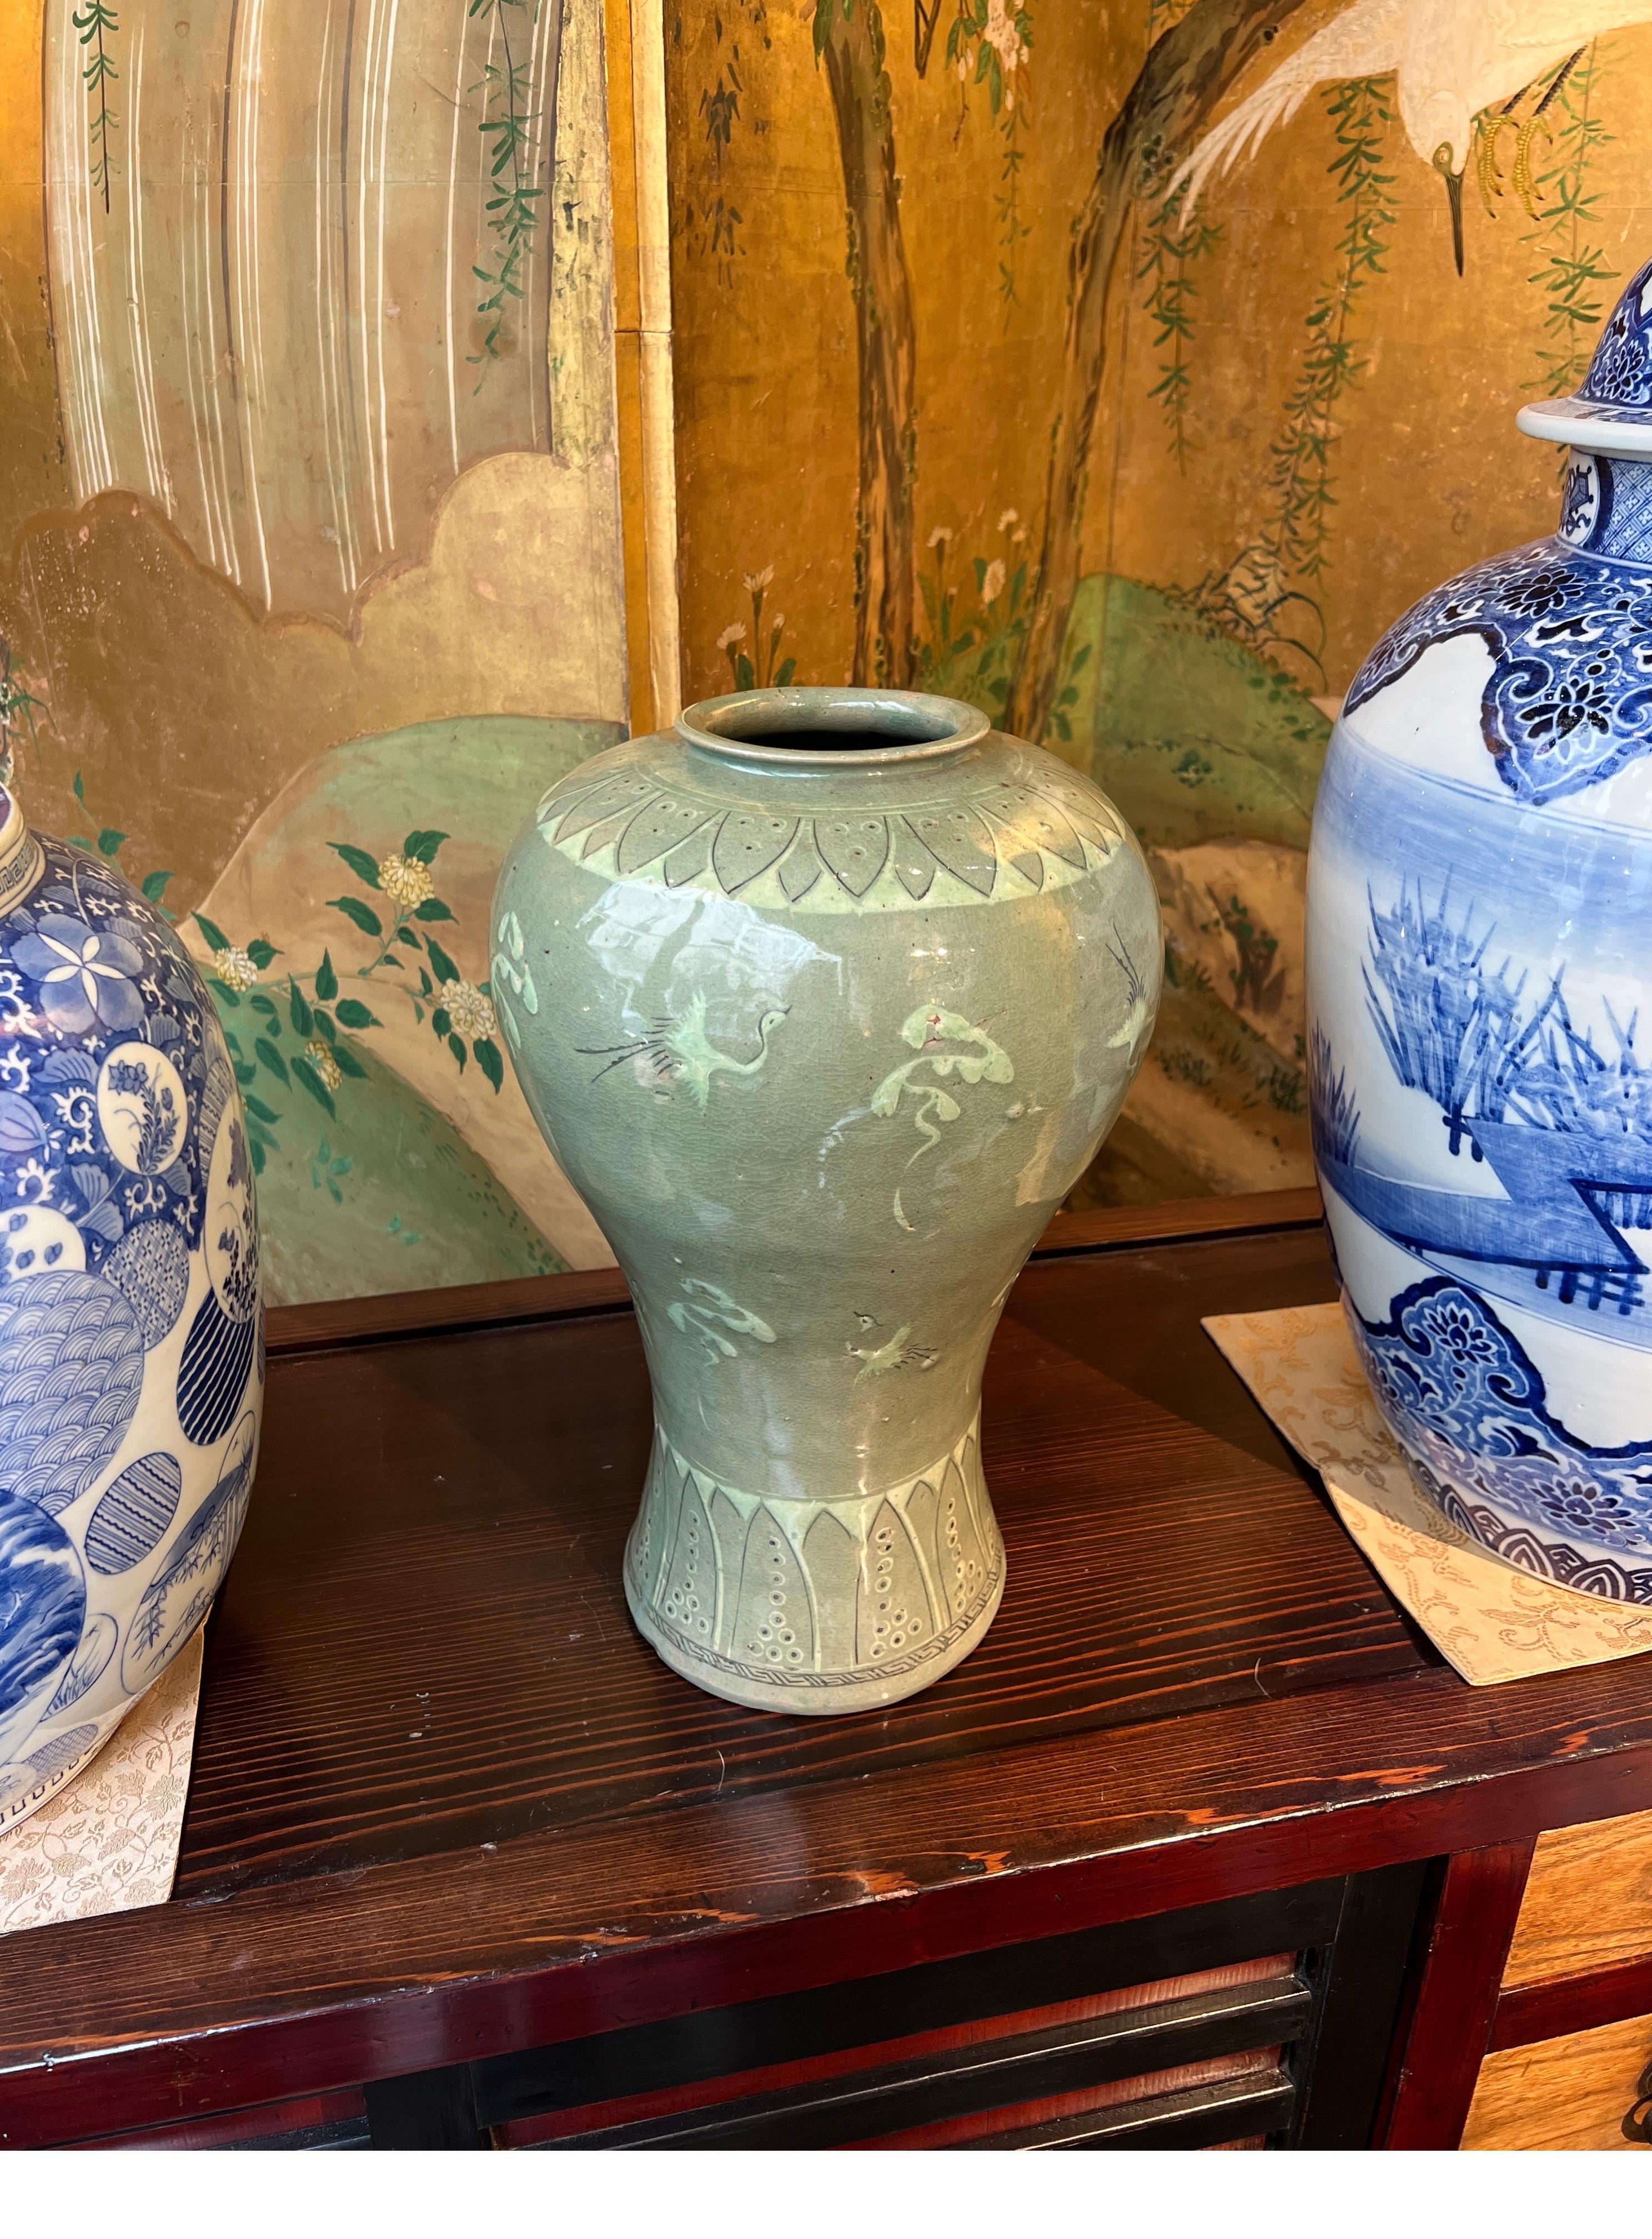 A large Korean celadon vase with decor of flying cranes and clouds.
Some firing defects as usual in this kind of ceramic but no chips and no hairline.
Very attractive celadon glaze color typical from Korean ceramic.
A vase of elegant shape that can